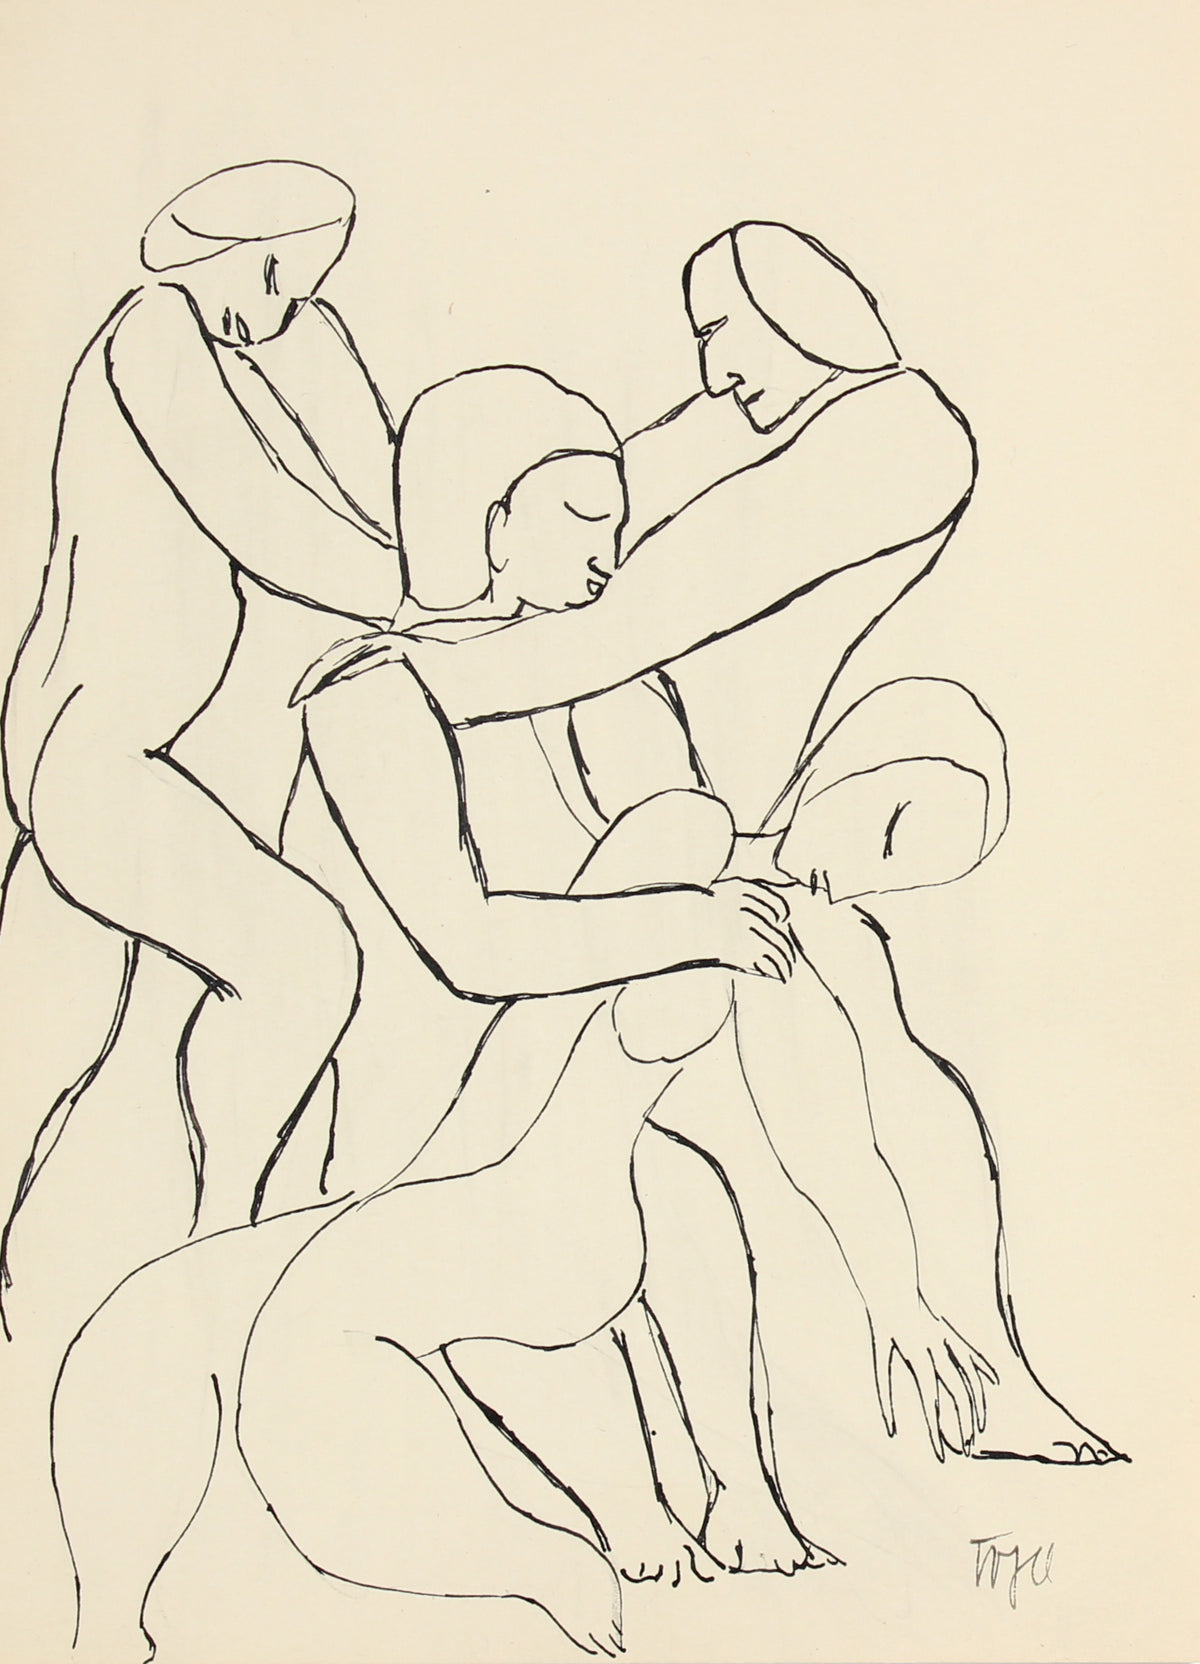 Abstracted Figures in a Scene &lt;br&gt;Early 20th Century Ink &lt;br&gt;&lt;br&gt;#13303